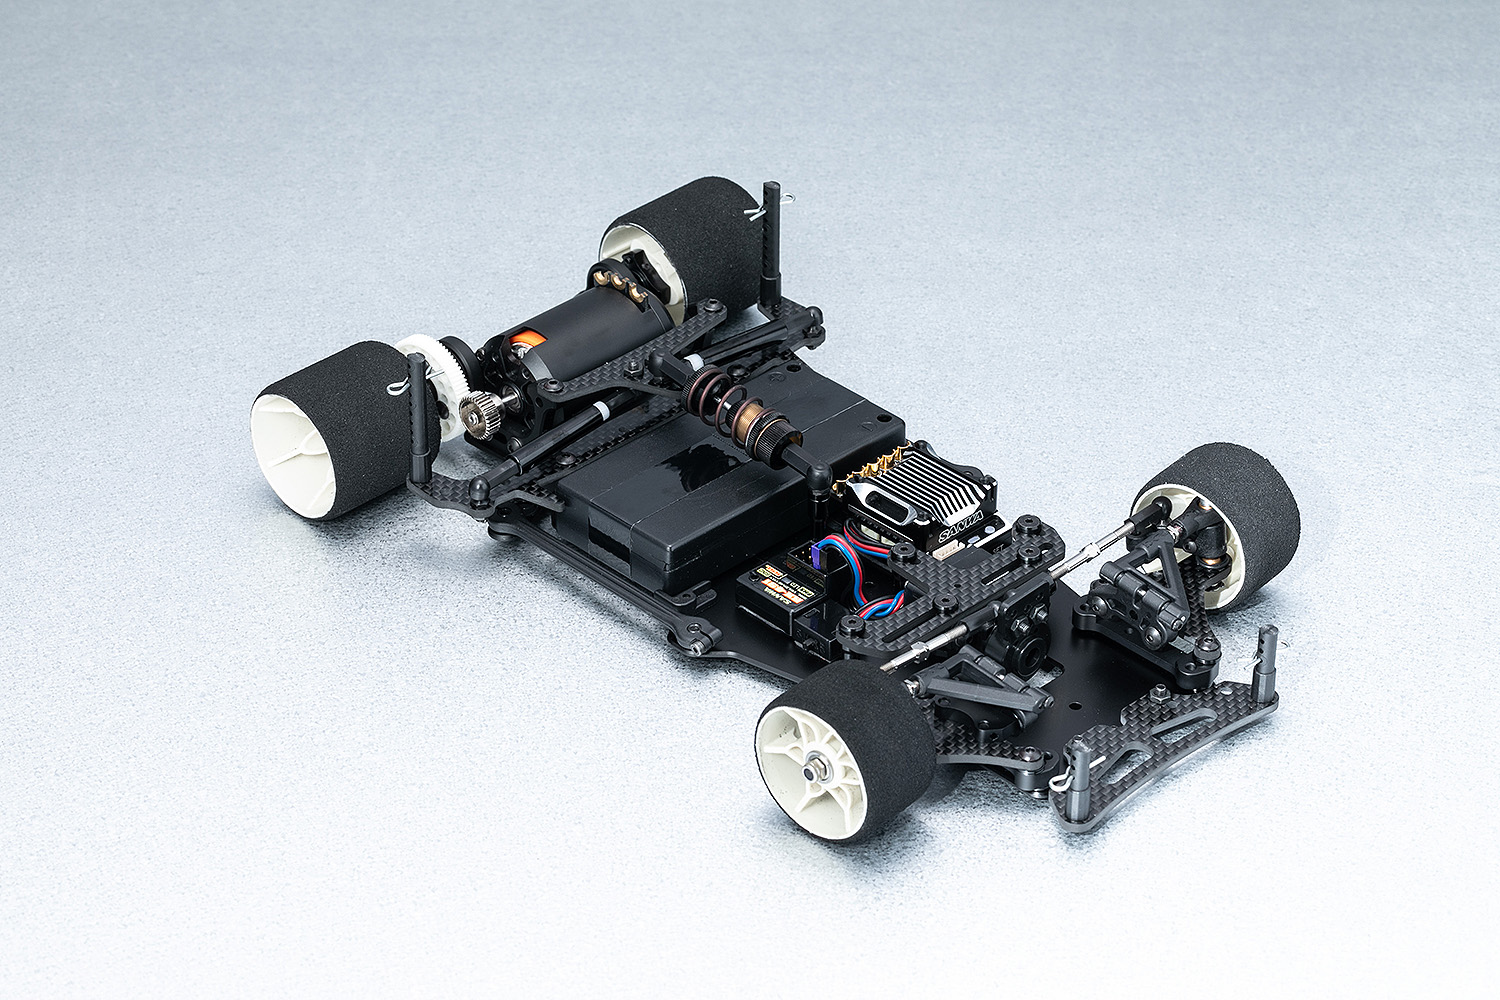 Team Bomber AK12 1/12-Scale Electric On-Road Car